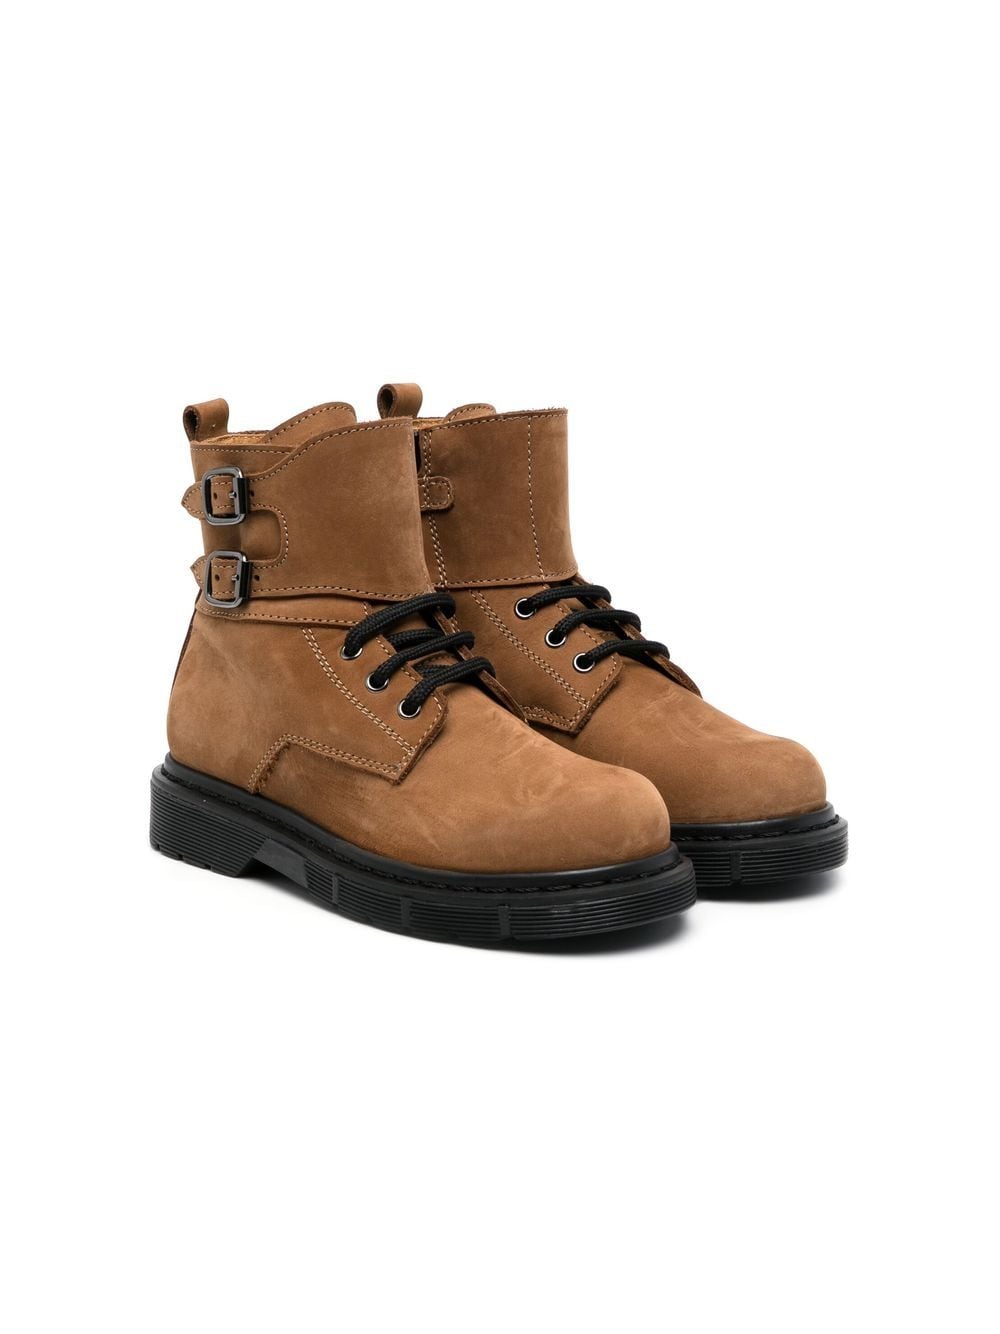 Image 1 of Gallucci Kids lace-up leather ankle boots